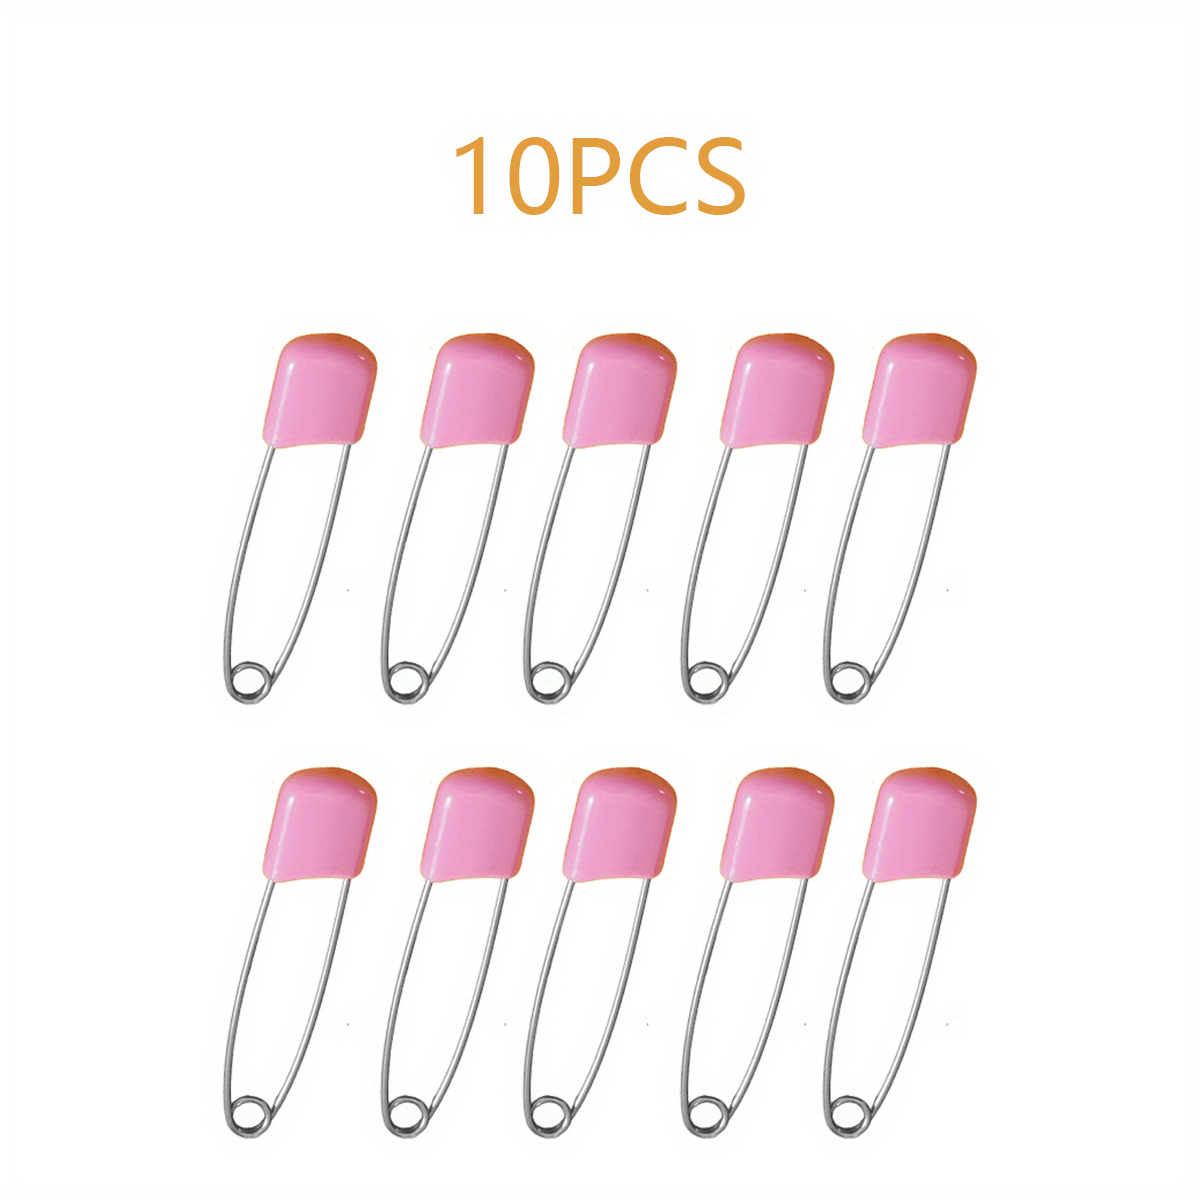 50 Pieces Diaper Pins Baby Safety Pins 2.2 Inch Plastic Head Cloth Diaper  Pins with Locking Closures Stainless Steel Nappy Pins with Velvet Bag